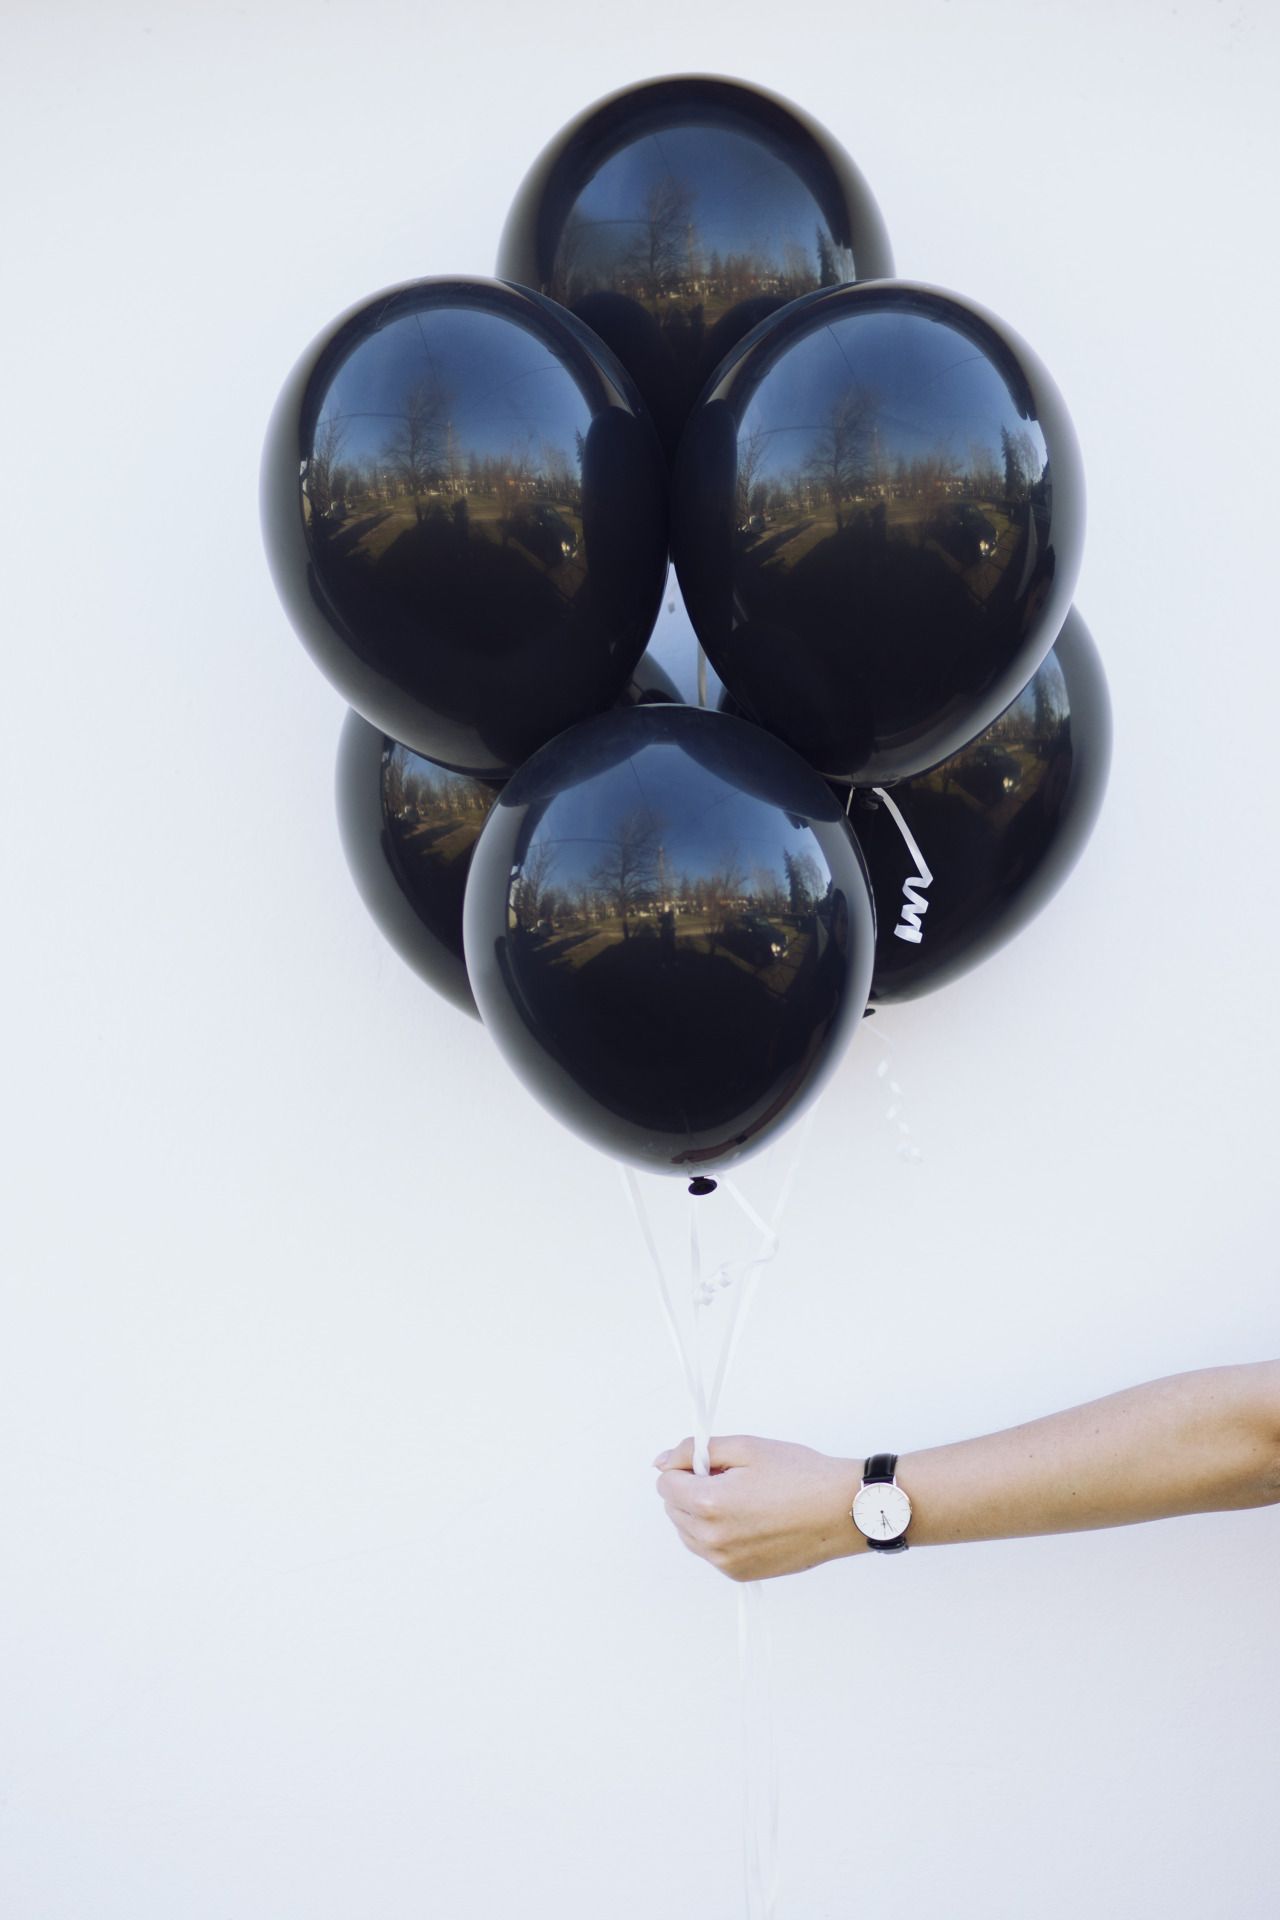 A person holding a bunch of black balloons against a white wall - Balloons